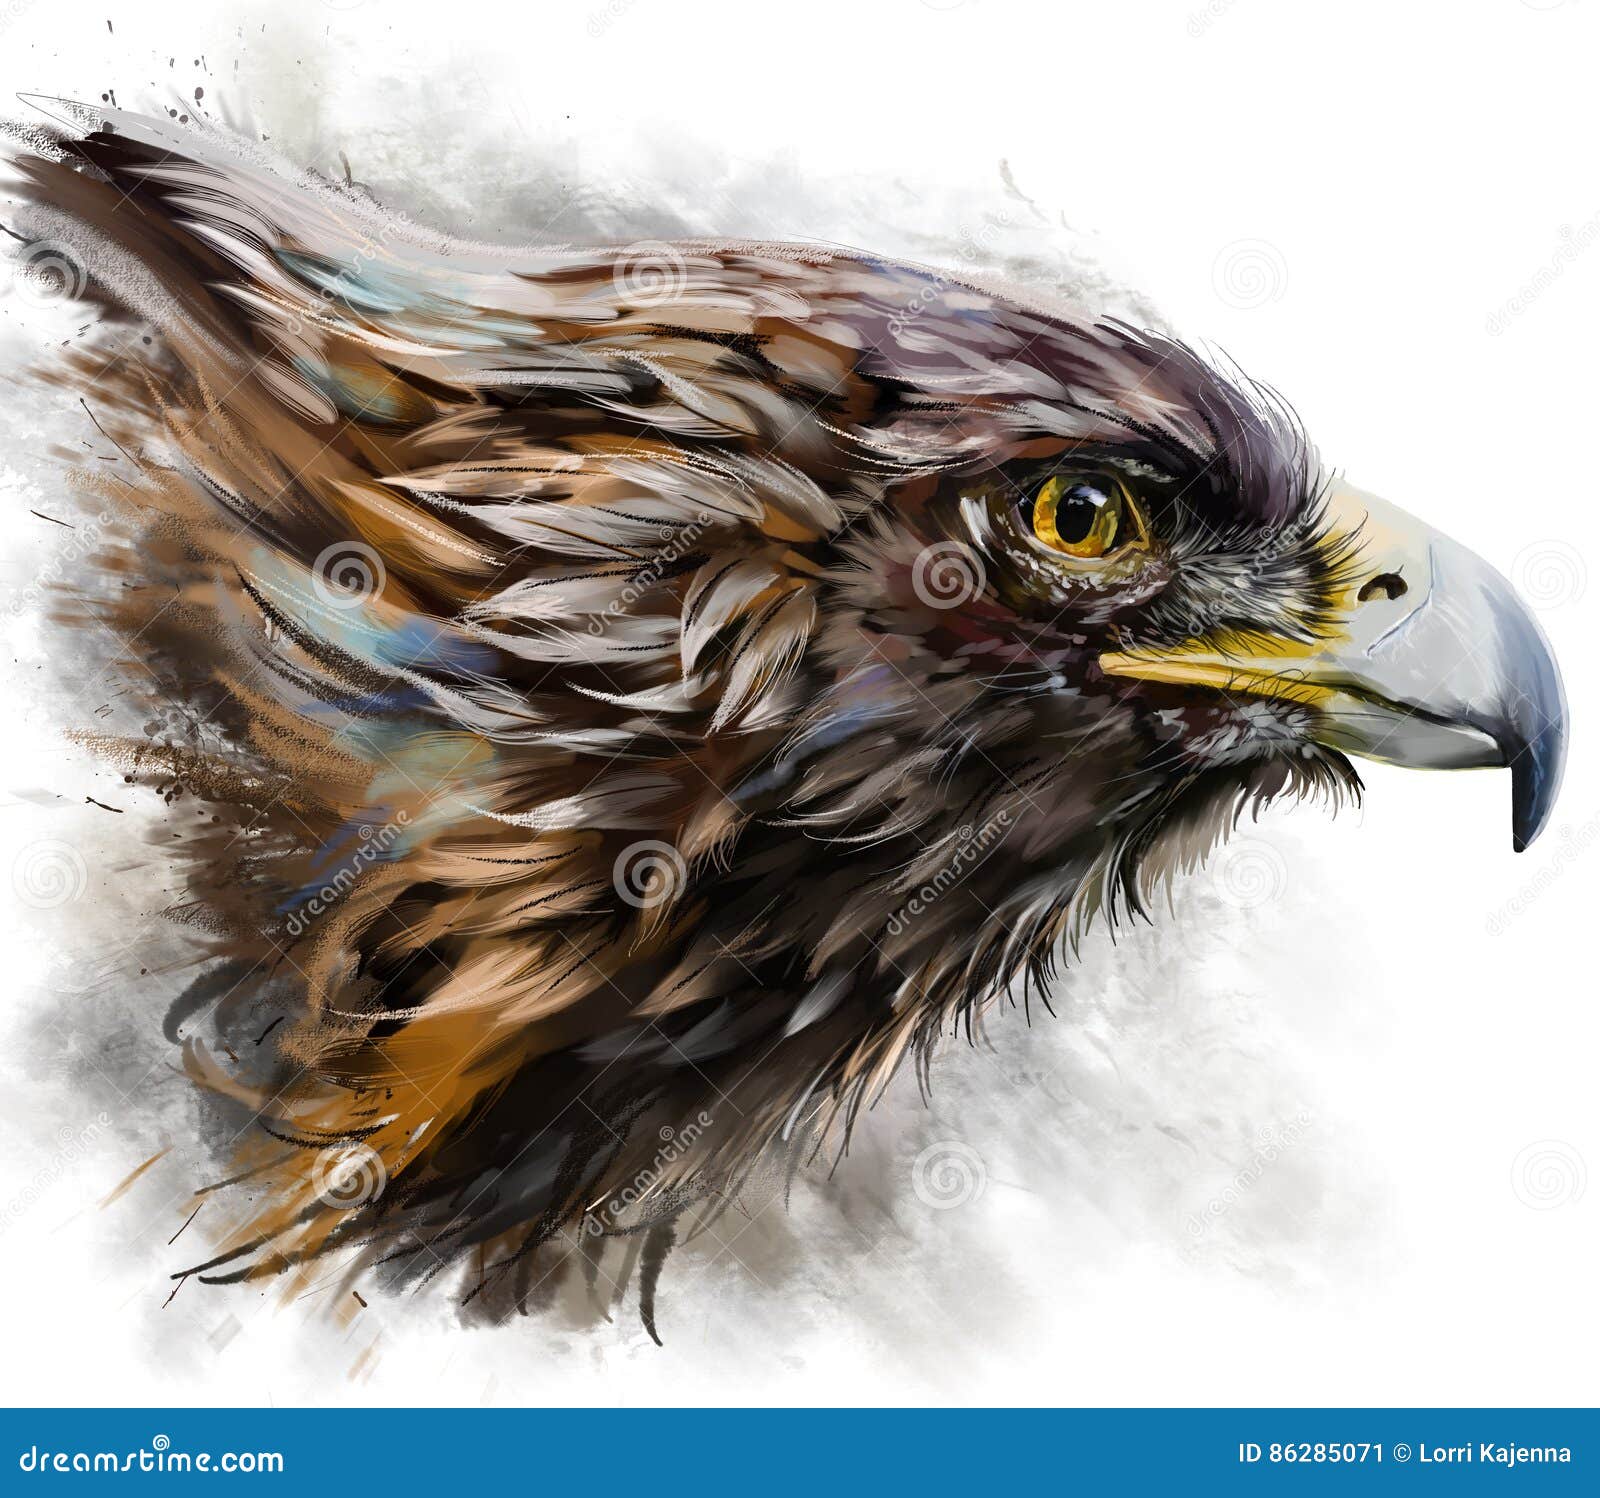 eagle watercolor painting